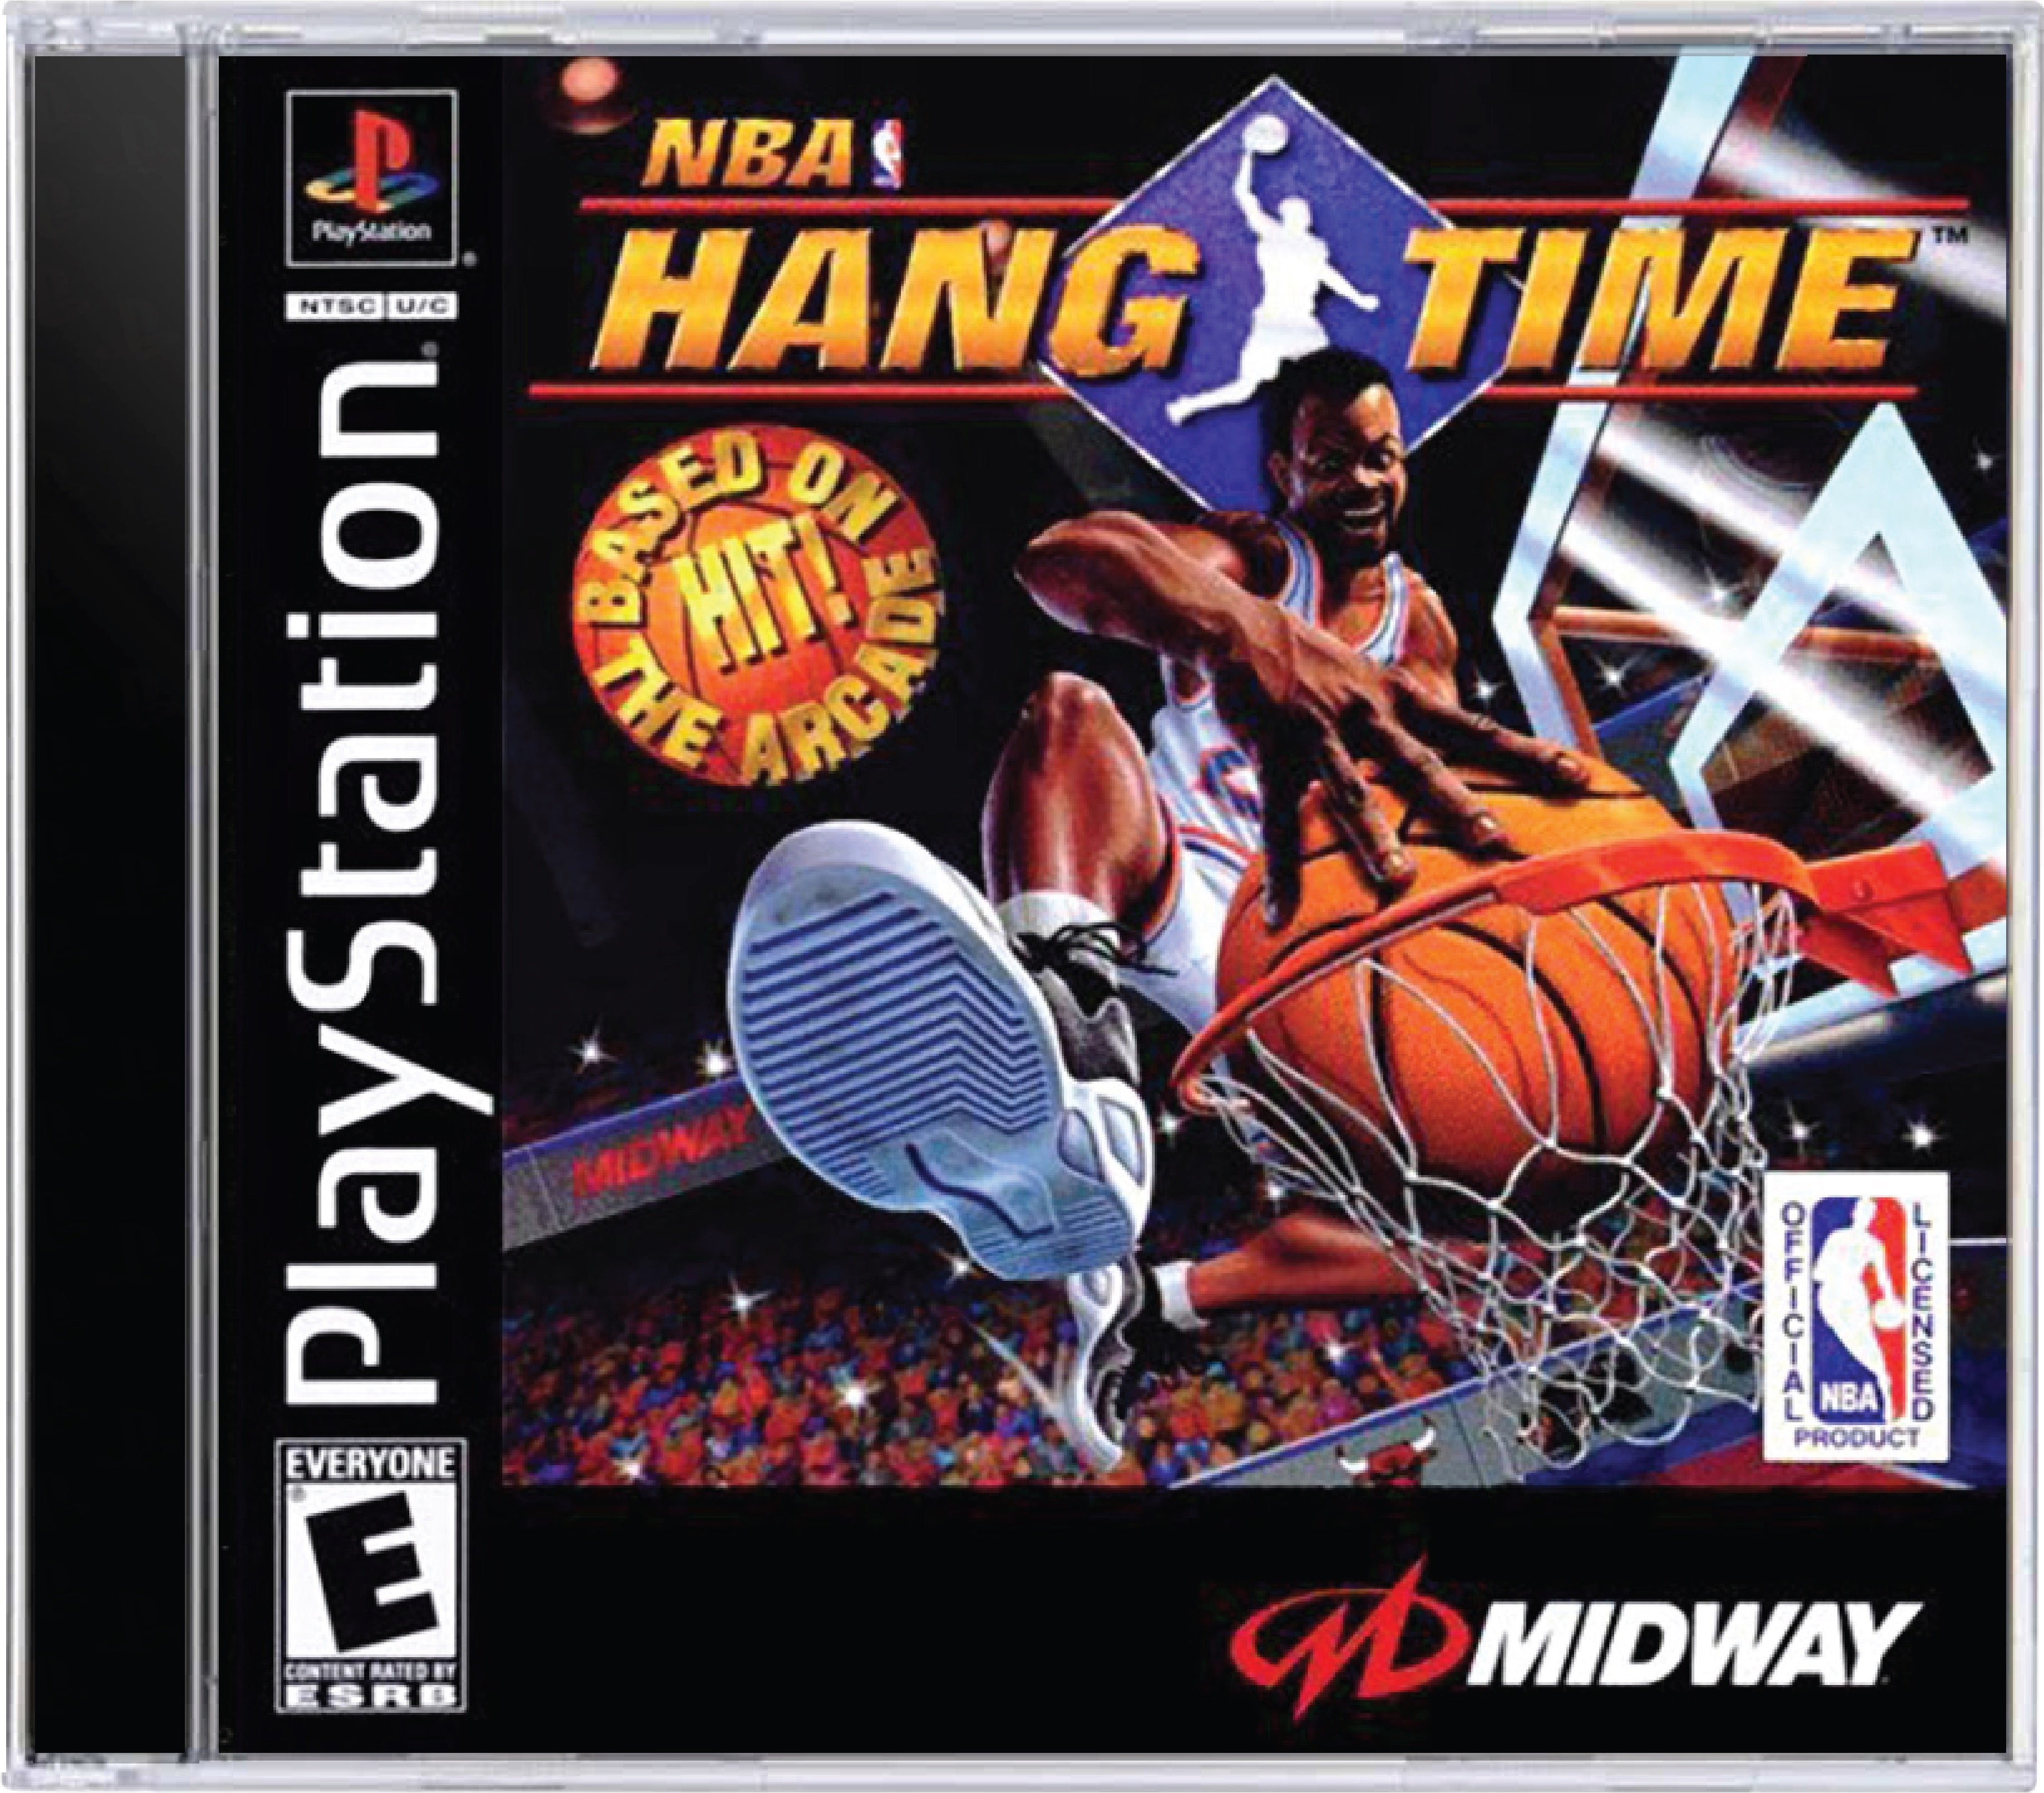 NBA Hang Time Cover Art and Product Photo